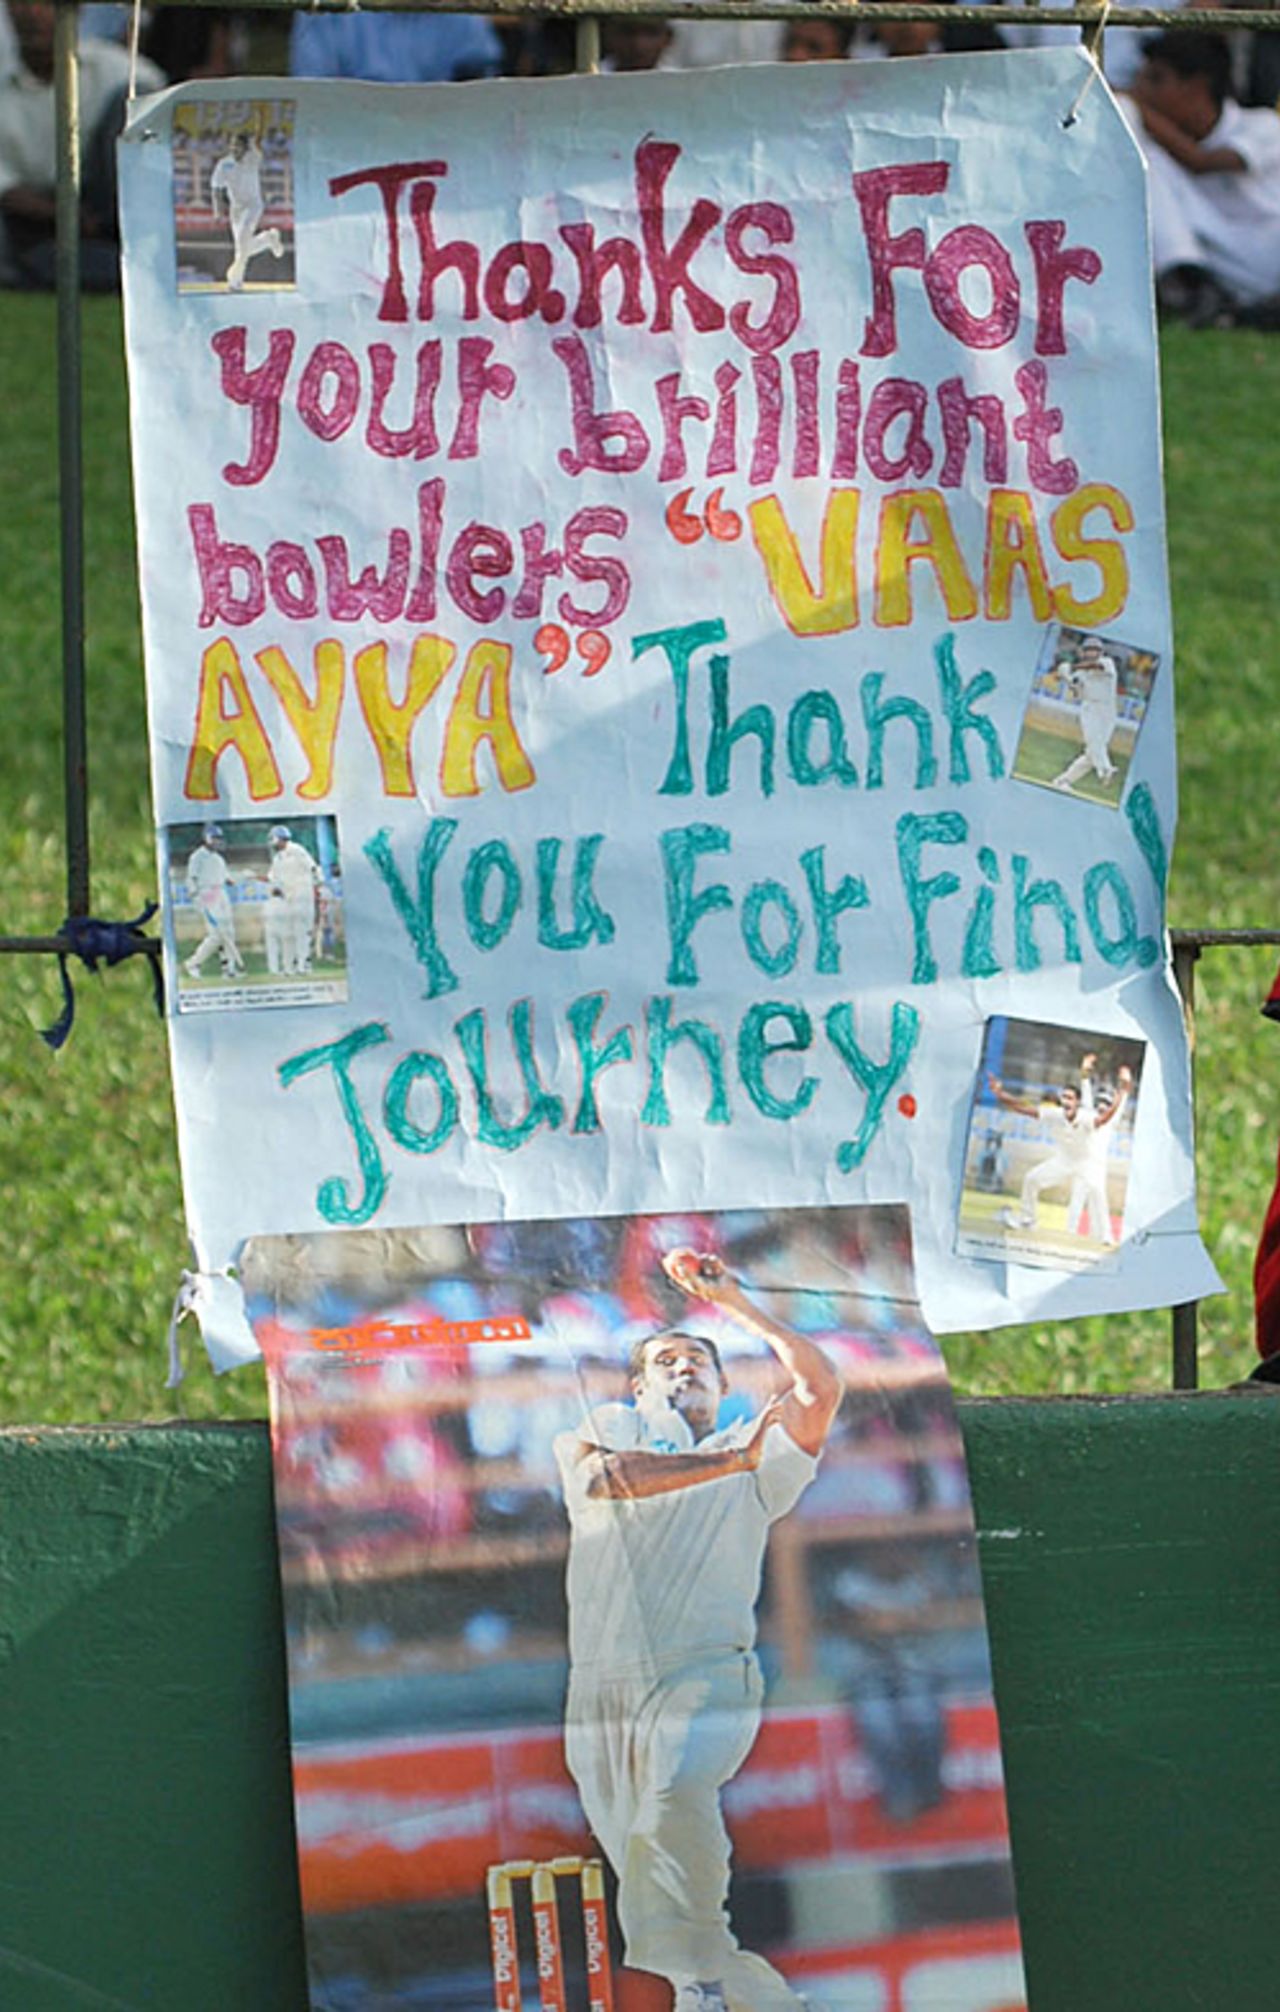 A poster paying tribute to Chaminda Vaas during his final Test, Sri Lanka v Pakistan, 3rd Test, Colombo, 4th day, July 23, 2009 